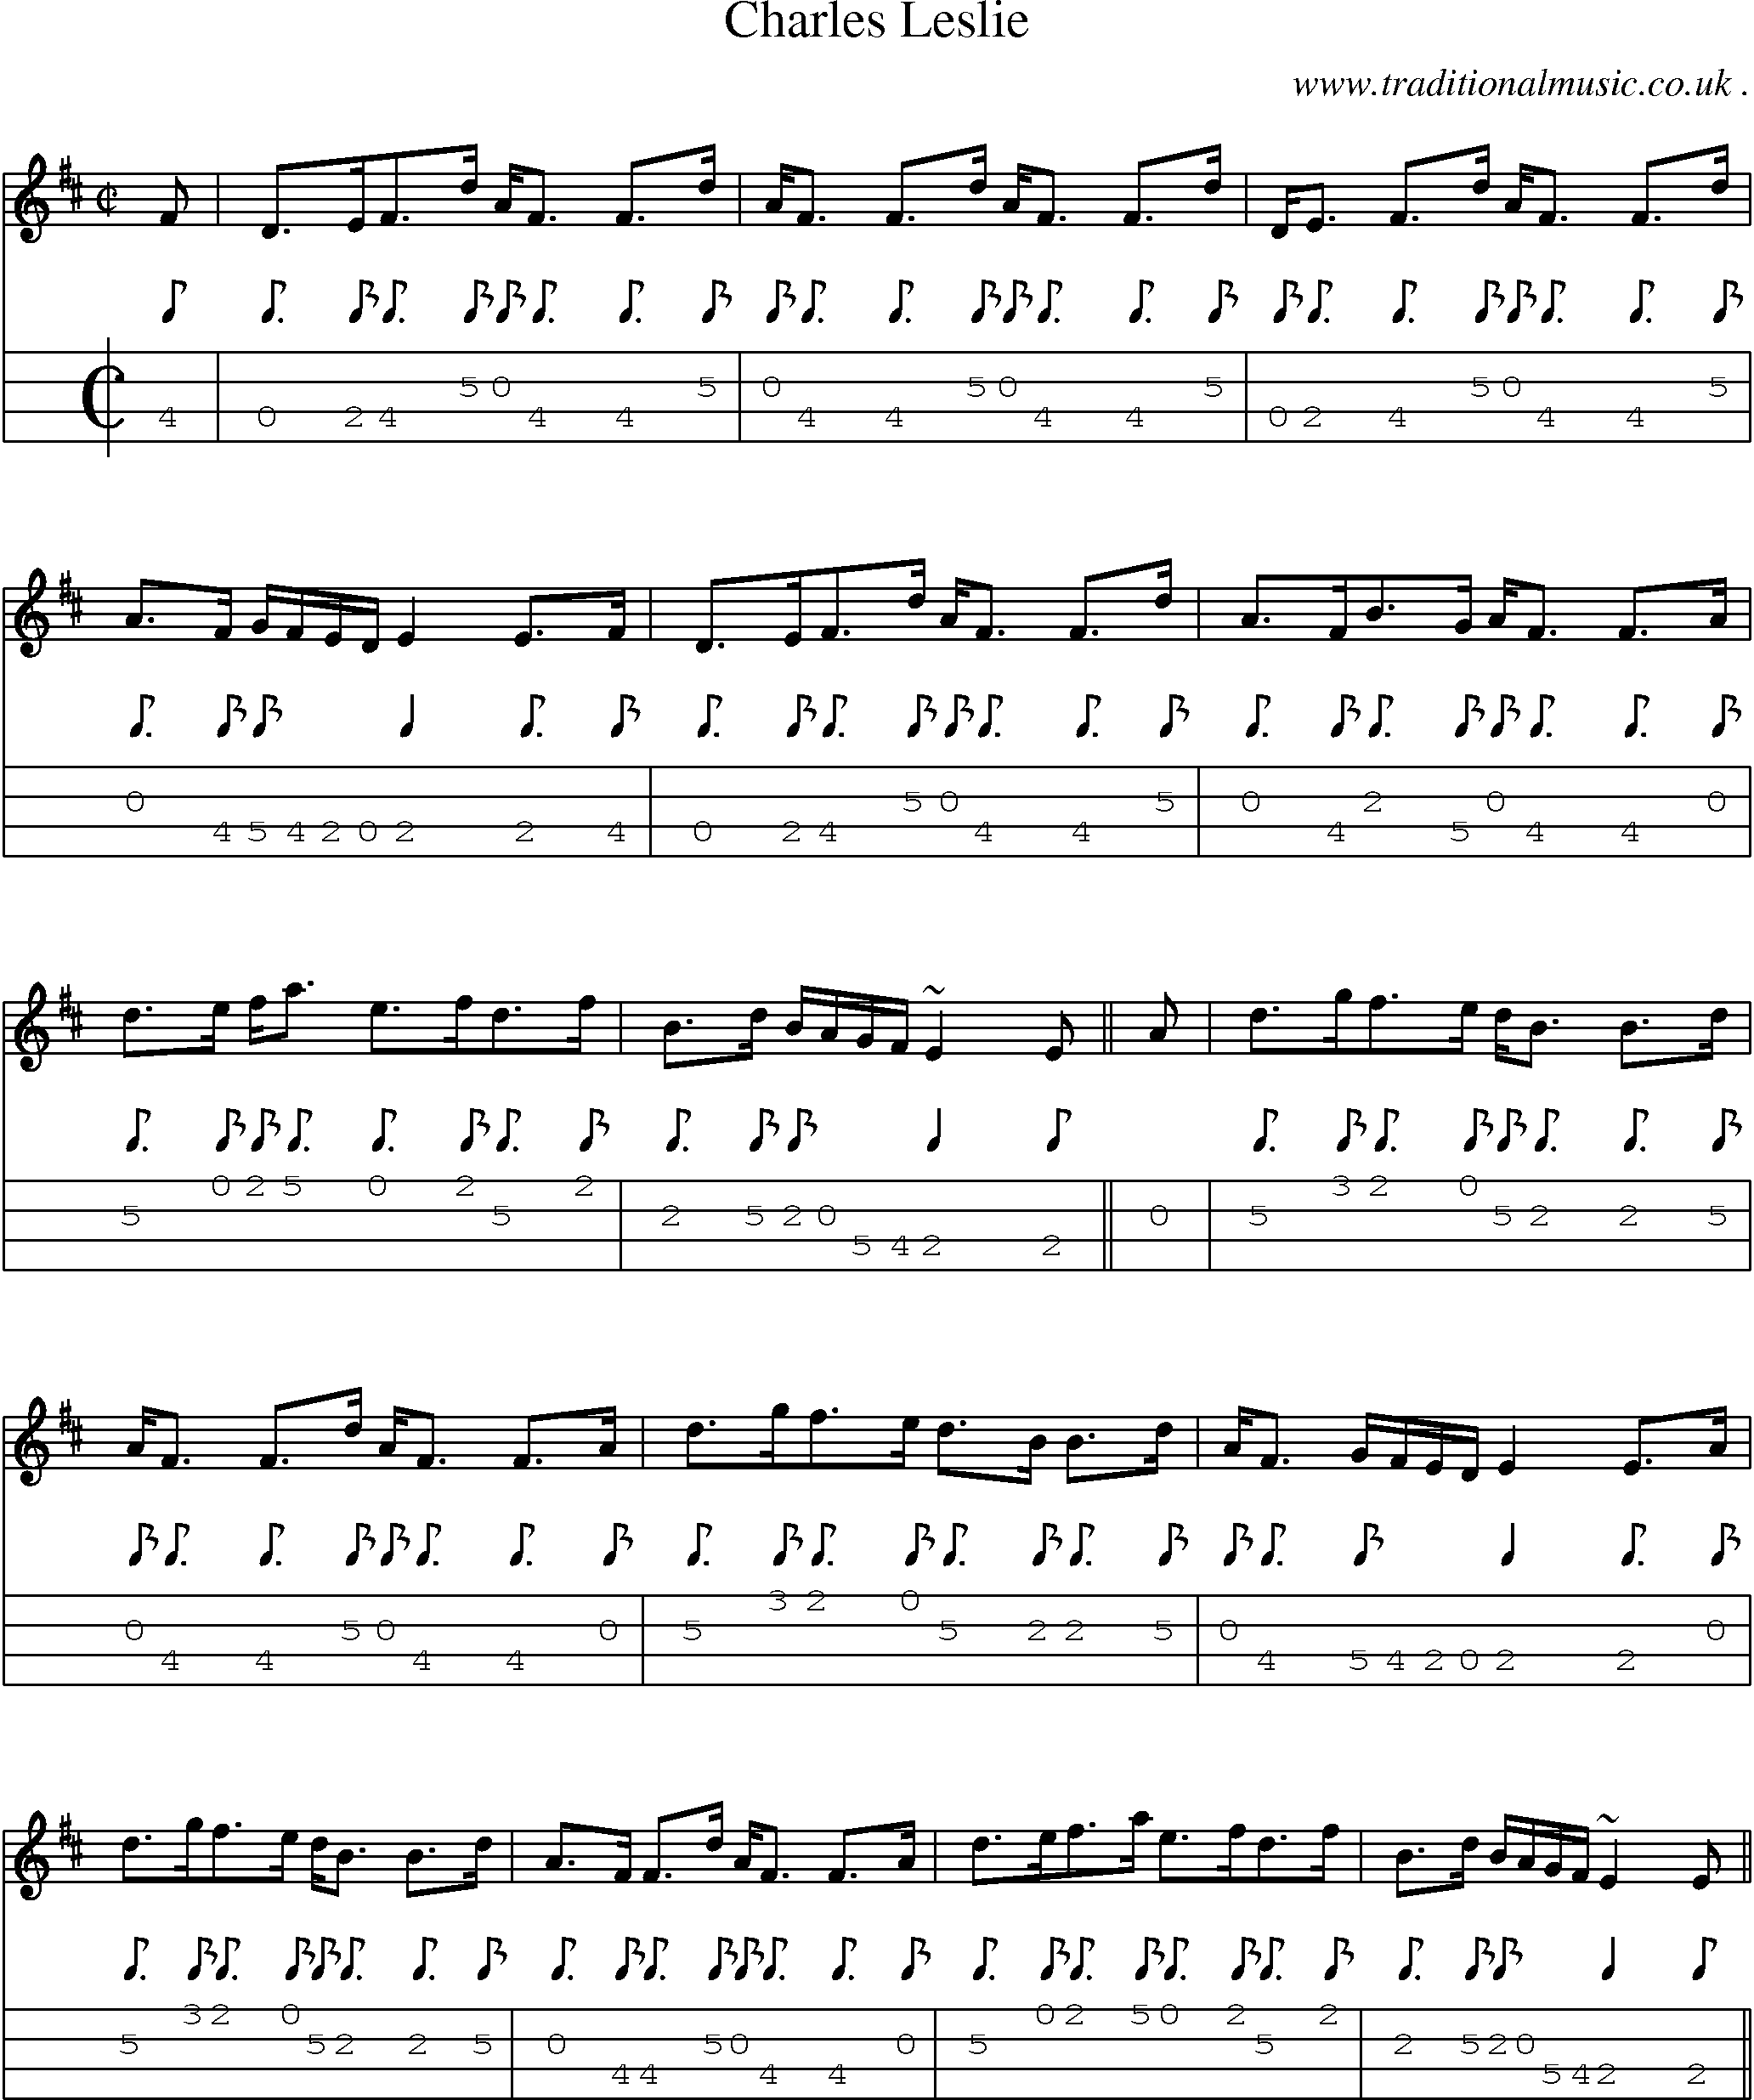 Sheet-music  score, Chords and Mandolin Tabs for Charles Leslie